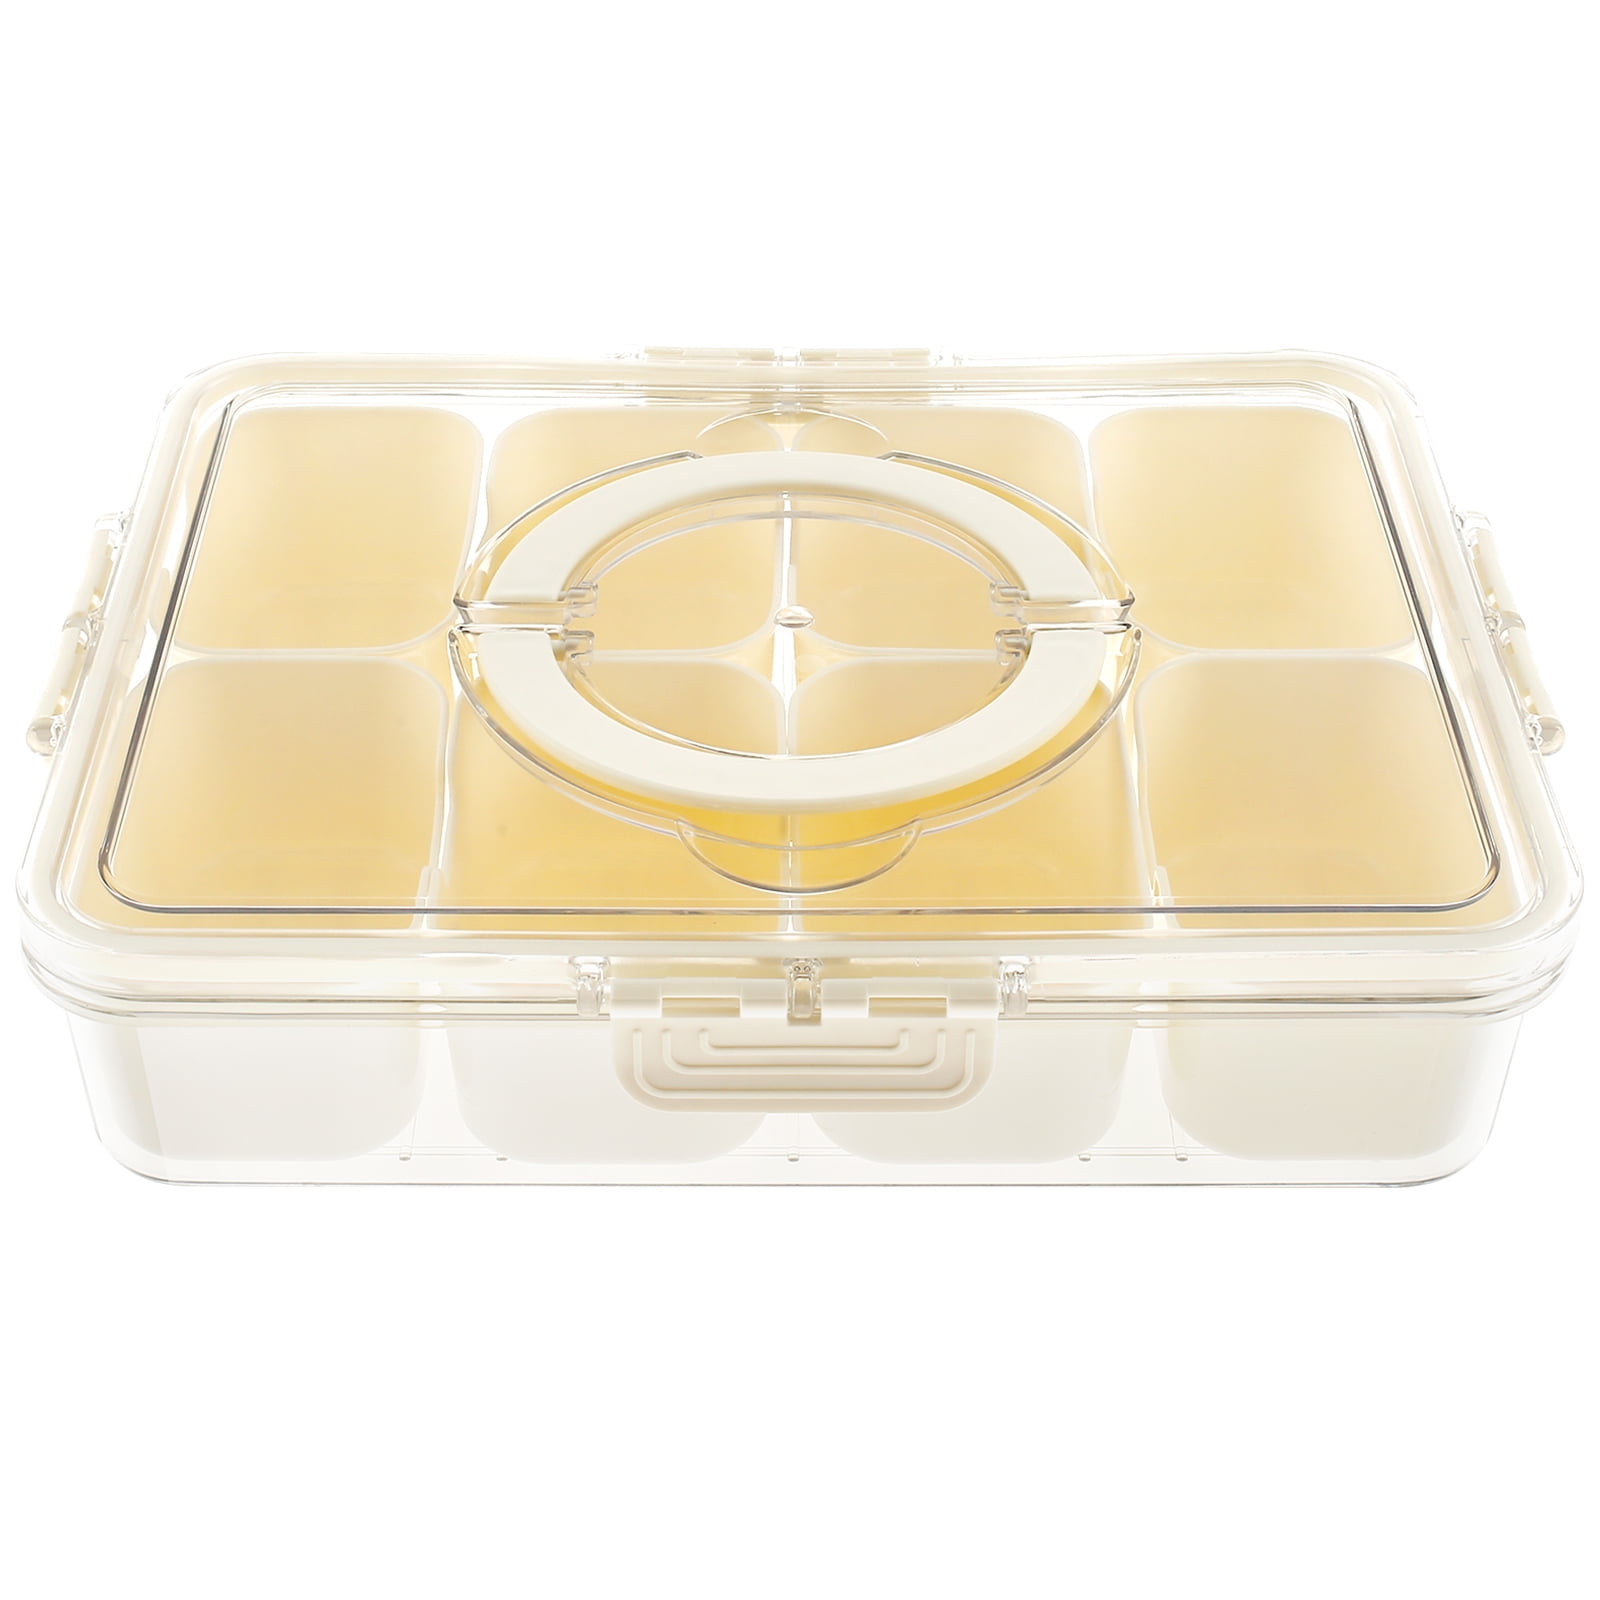 Rectangular Snack Box with Lid Handle Clear Divideds Serving Tray 6/8 Grid  Food Storage Container Serving Platters Portable Snack Platter Organizer